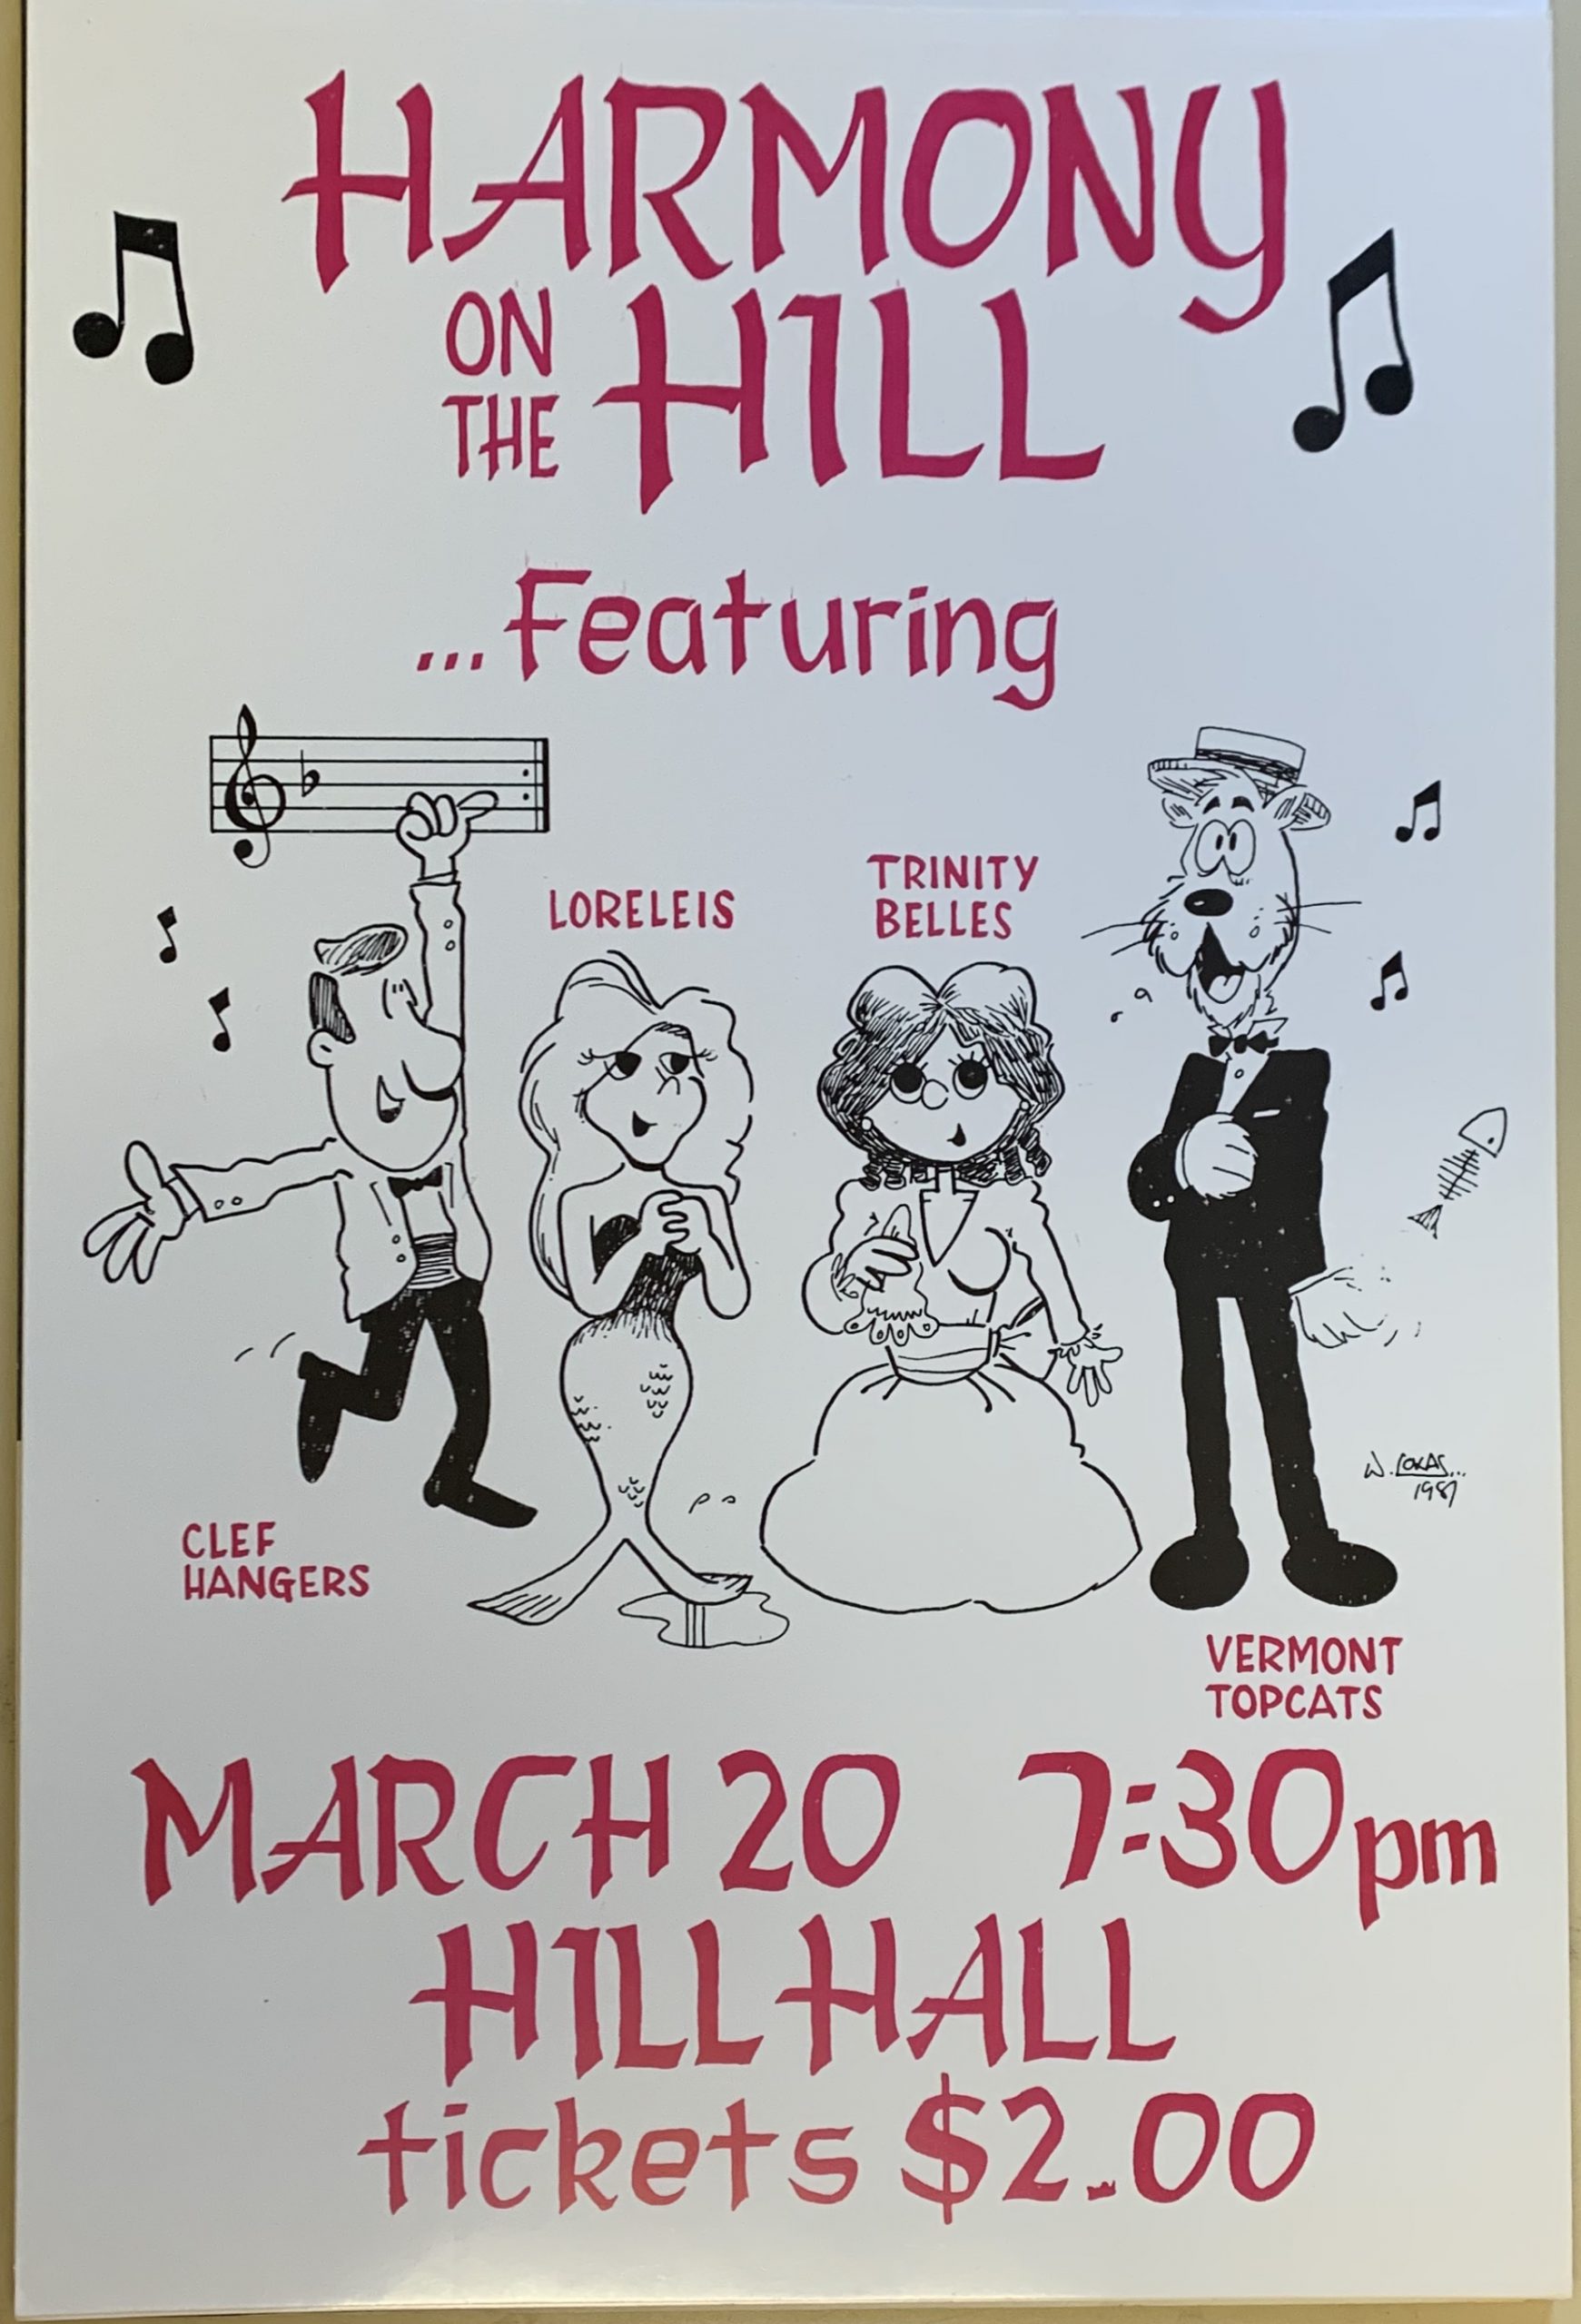 Harmony on the Hill featuring the Cliff Hangers, Loreleis, Trinity Bells, and Vermont Topcats flyer with drawn man, mermaid, woman and cat by each group's name.